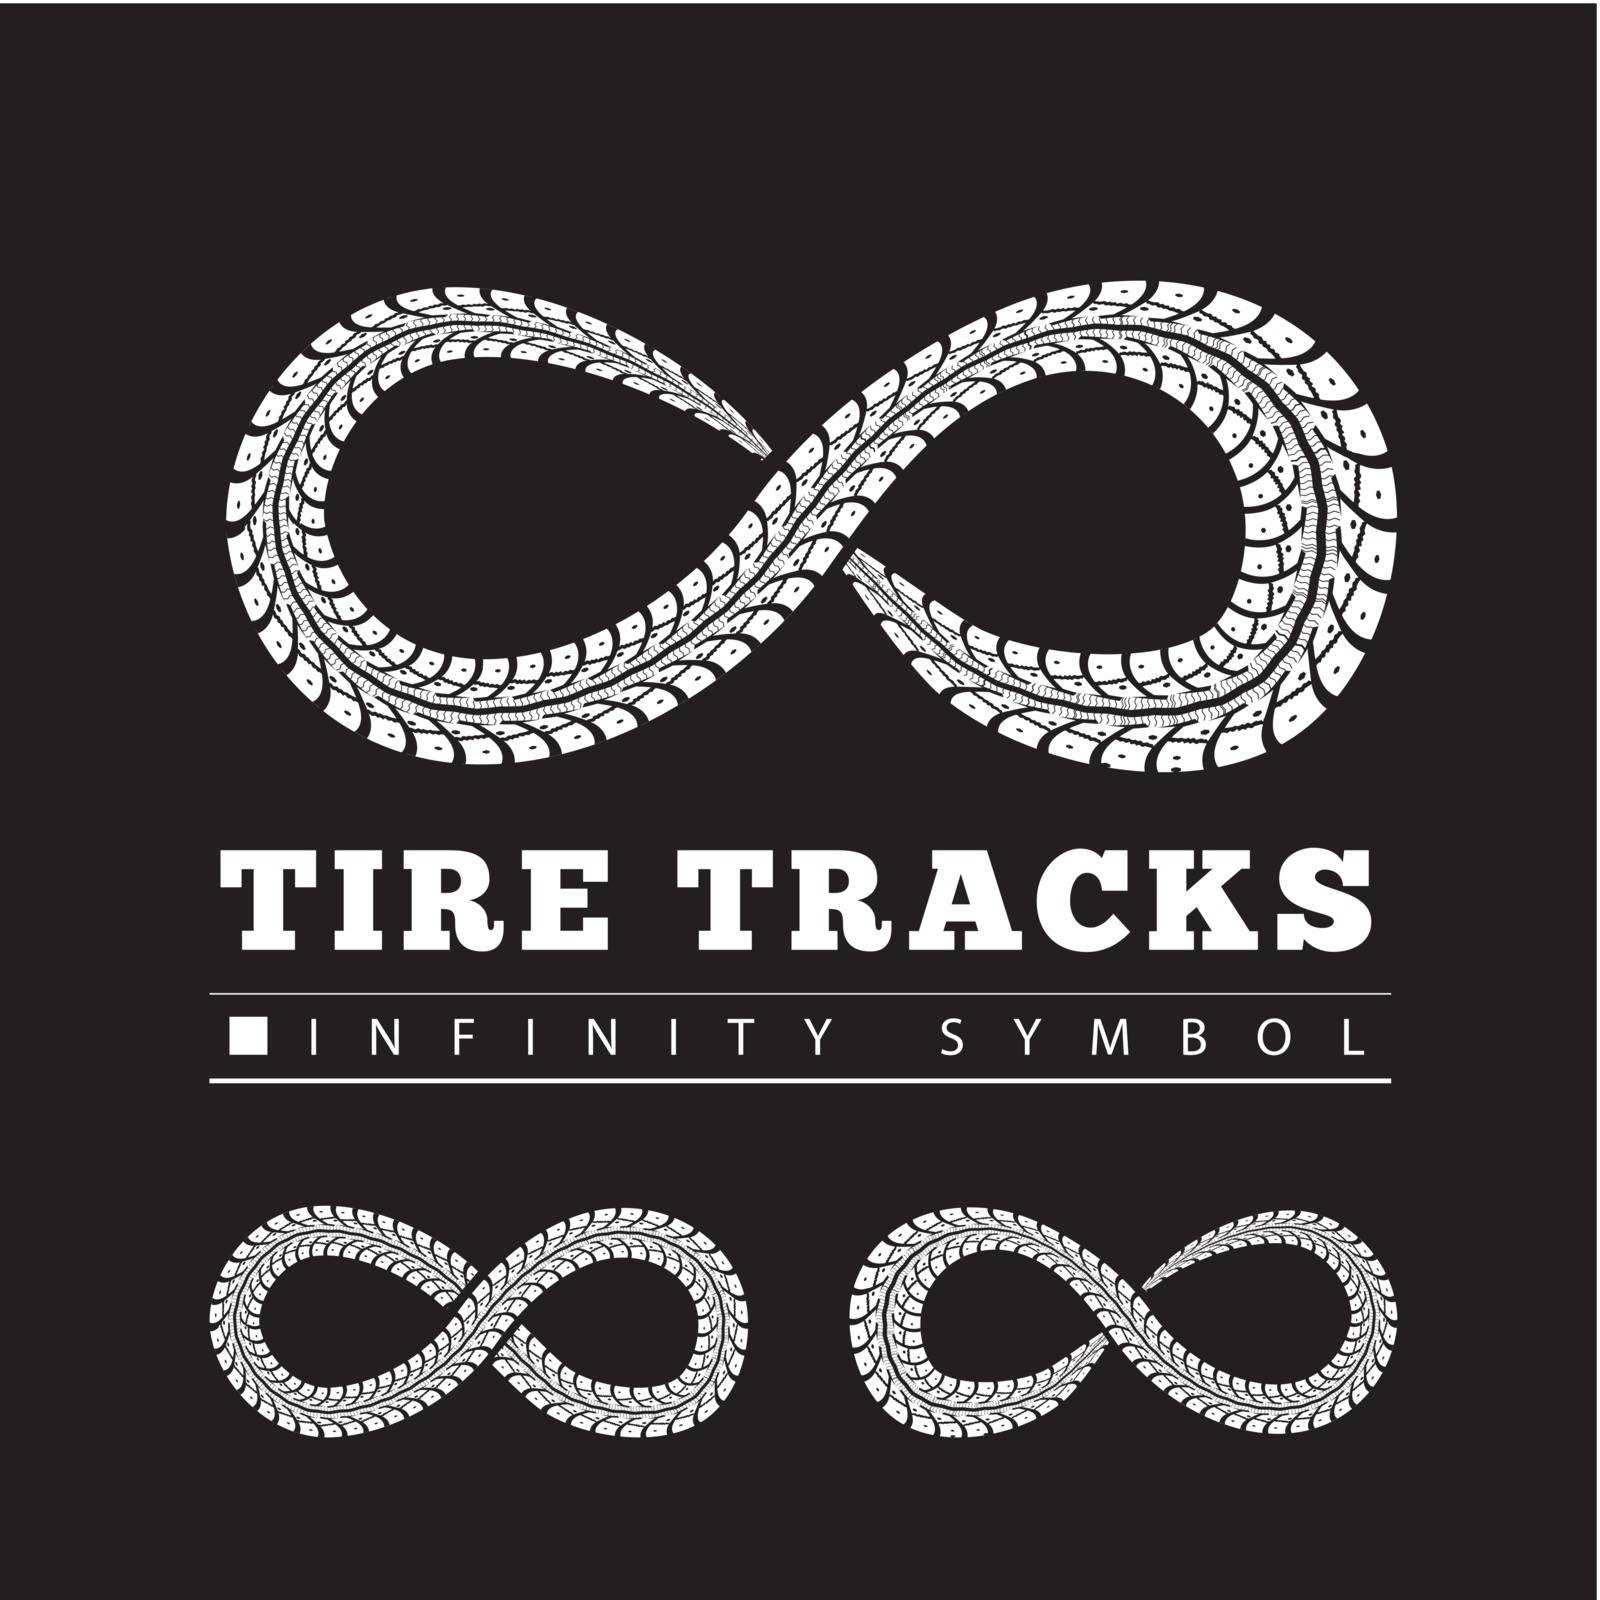 Tire Tracks in Infinity Form by sermax55